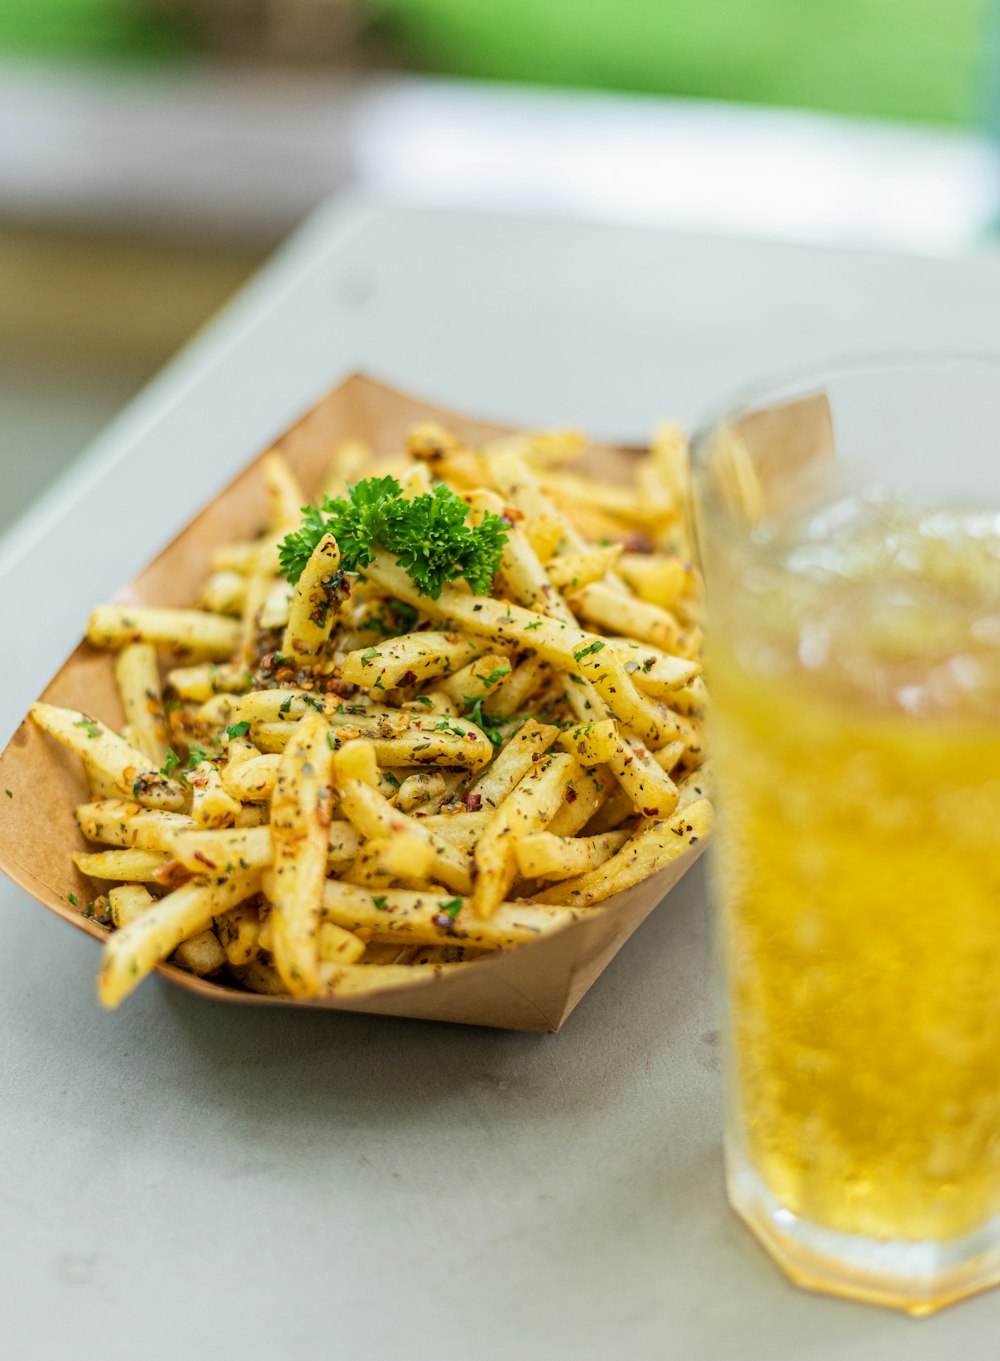 a plate of fries and a glass of beer